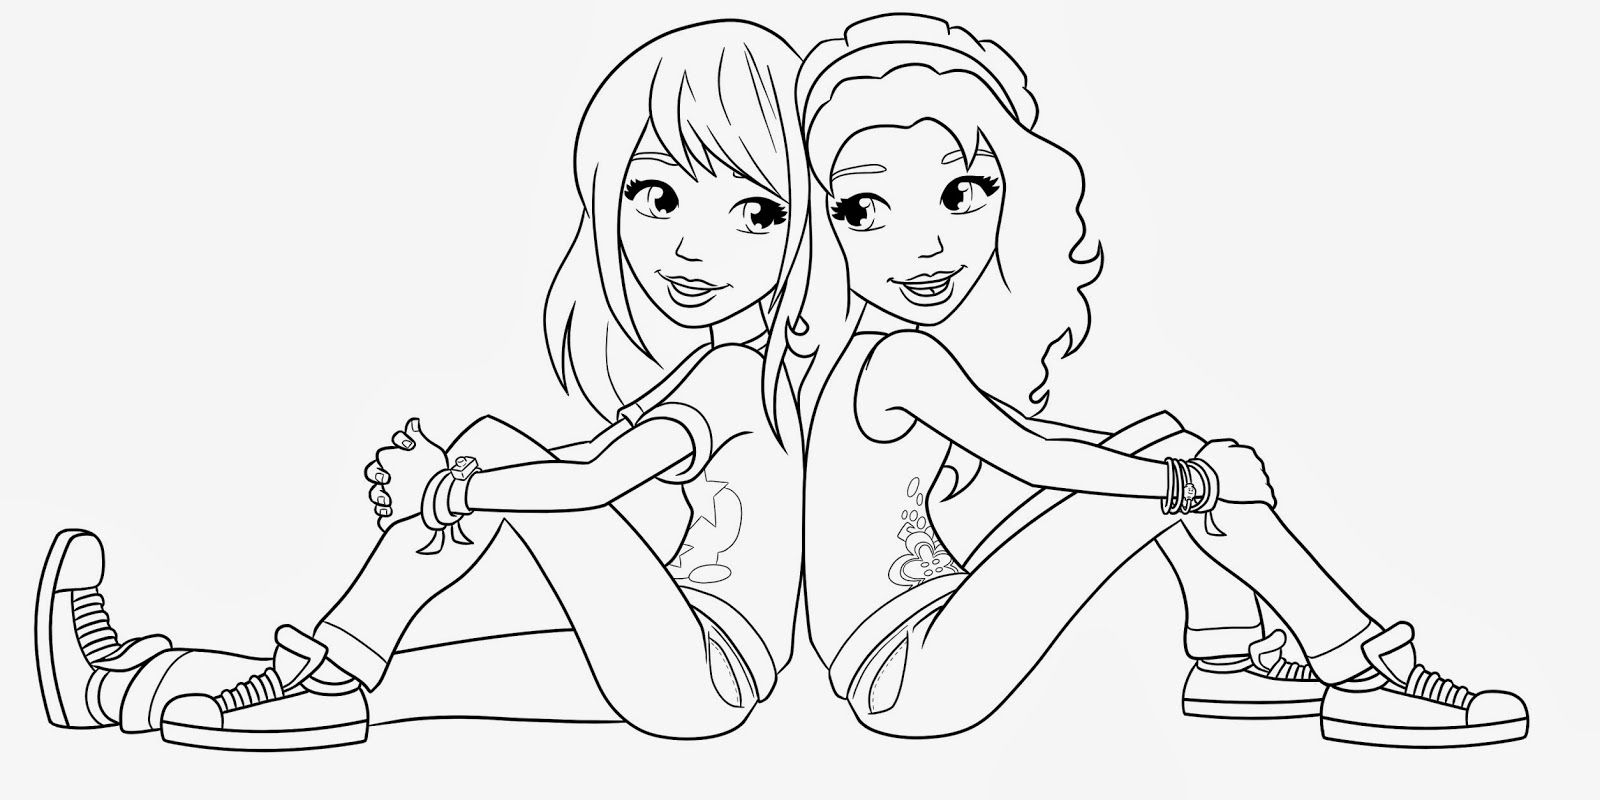 Lego friends sitting coloring page for kids